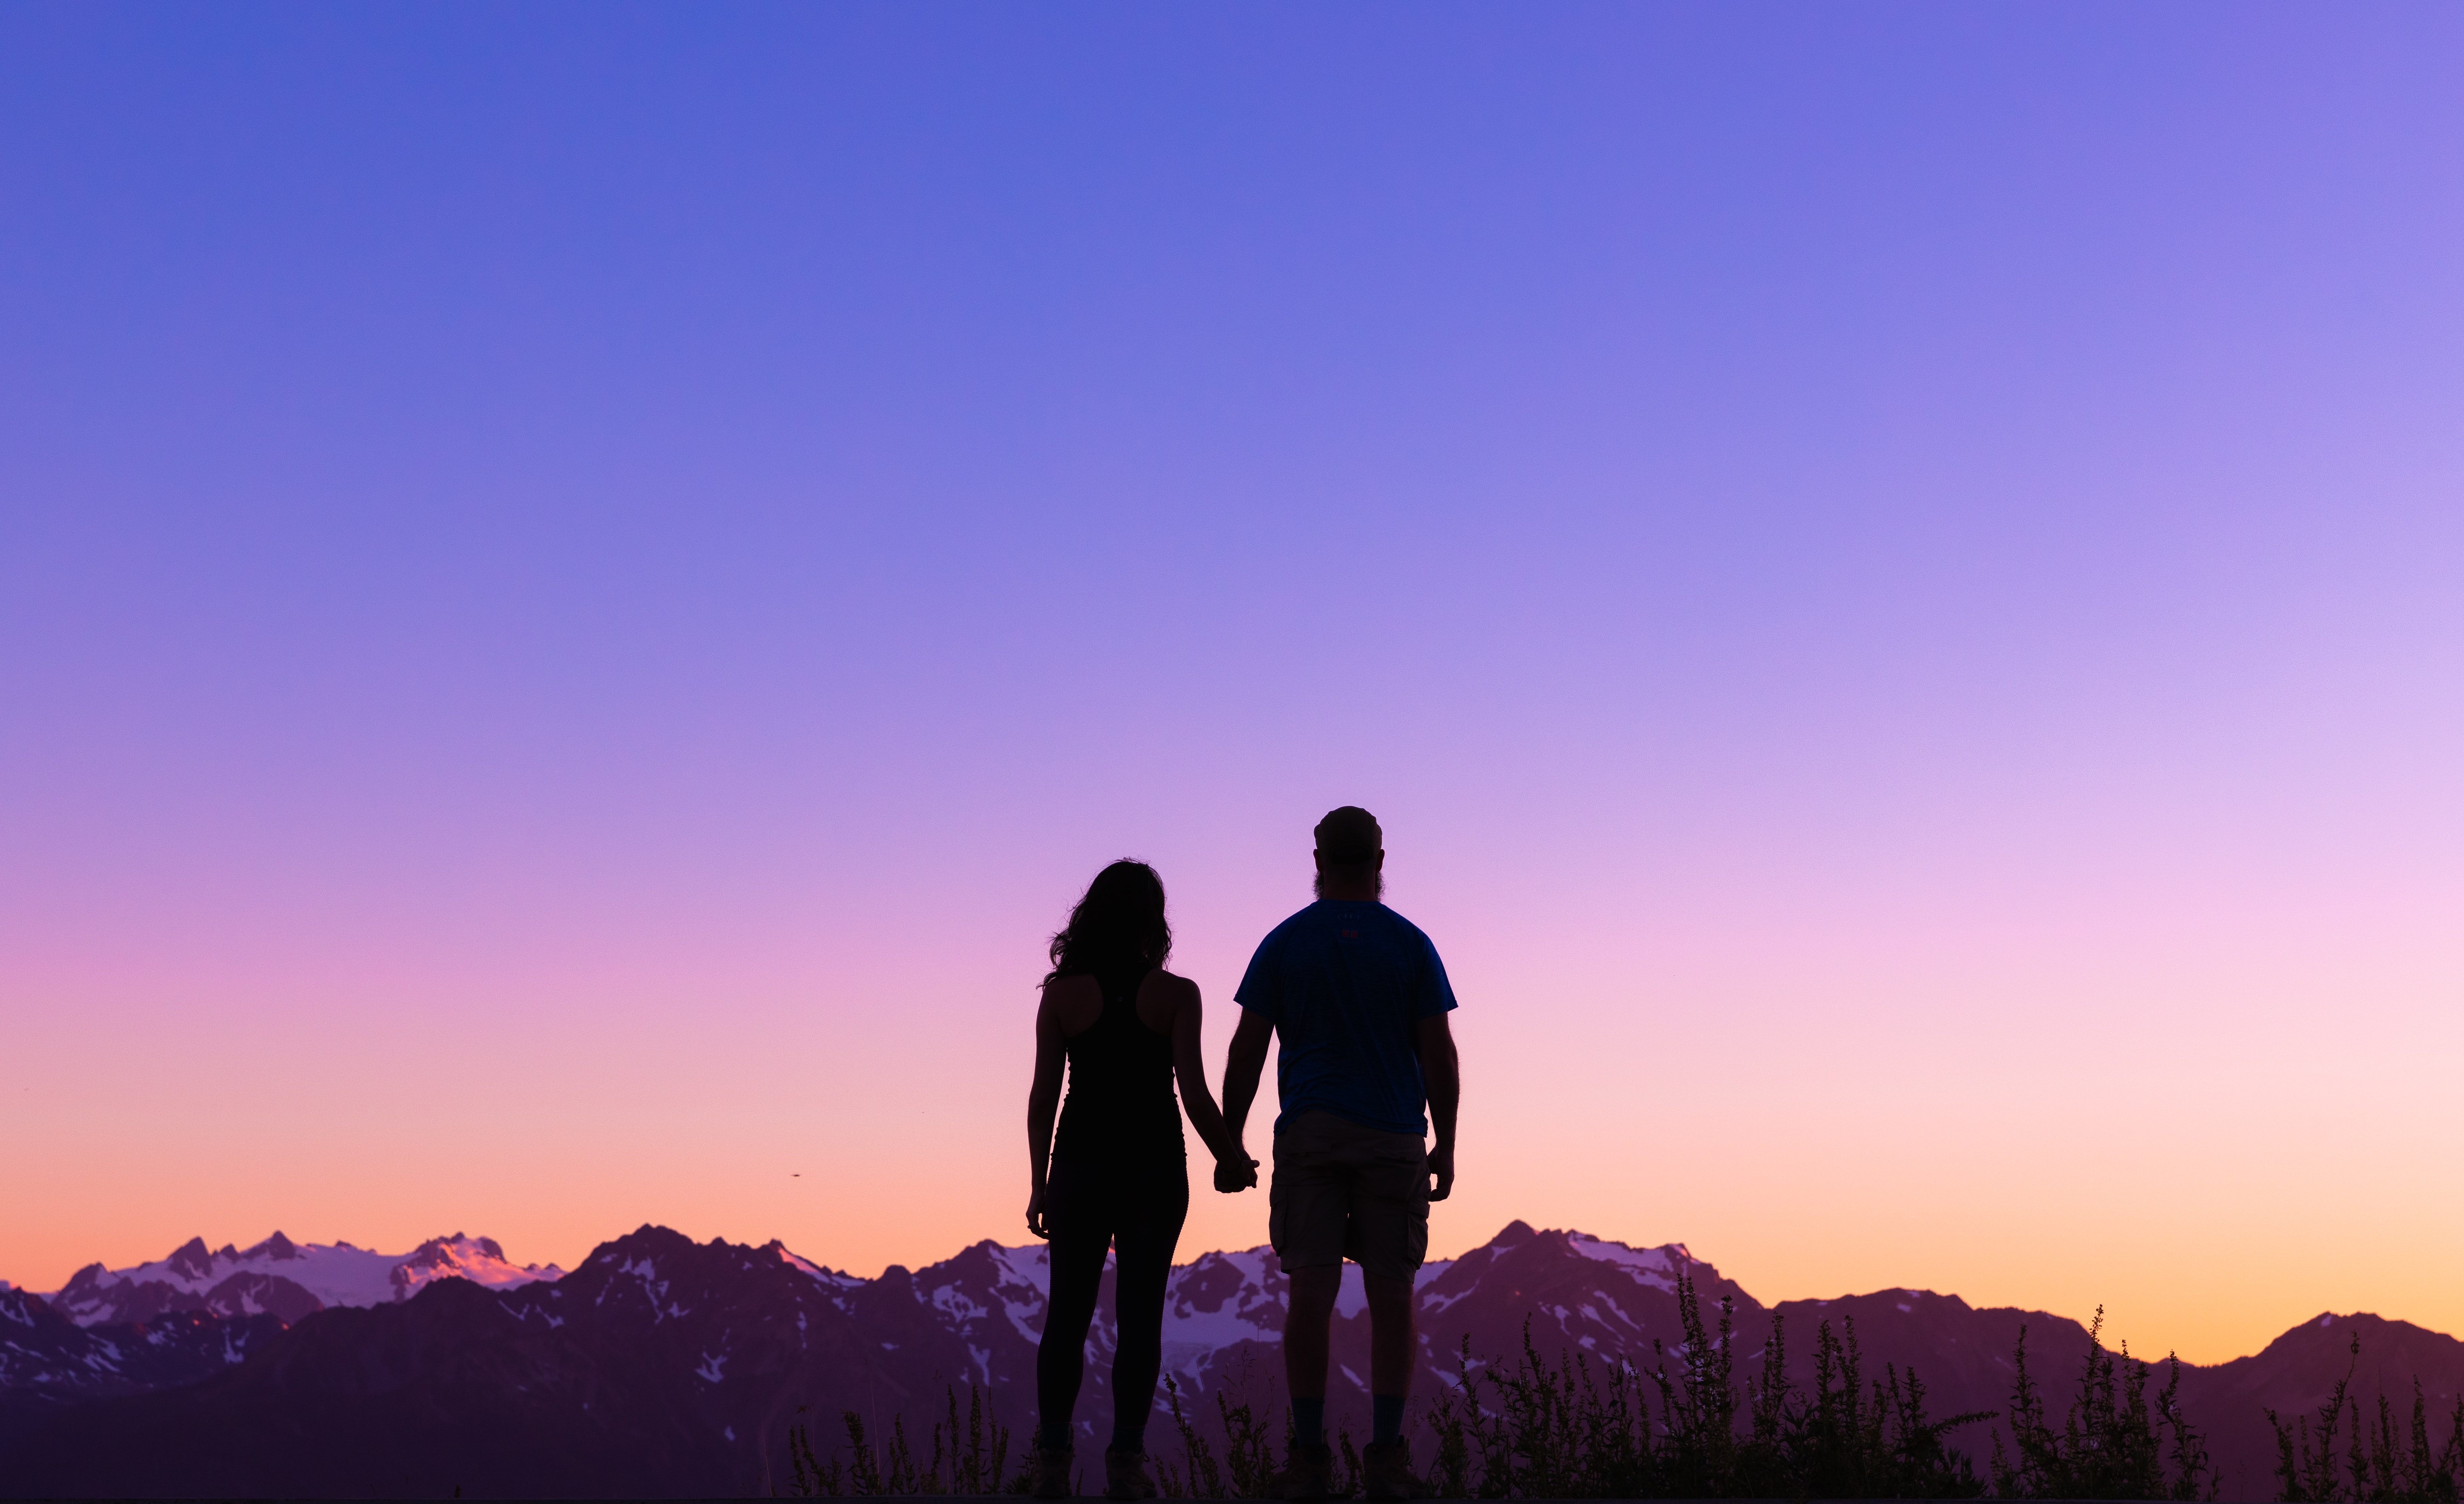 HD wallpaper, Romantic, Lovers, Glacier Mountains, Couple, Together, , Hands Together, 5K, Sunrise, Silhouette, Clear Sky, Outdoor